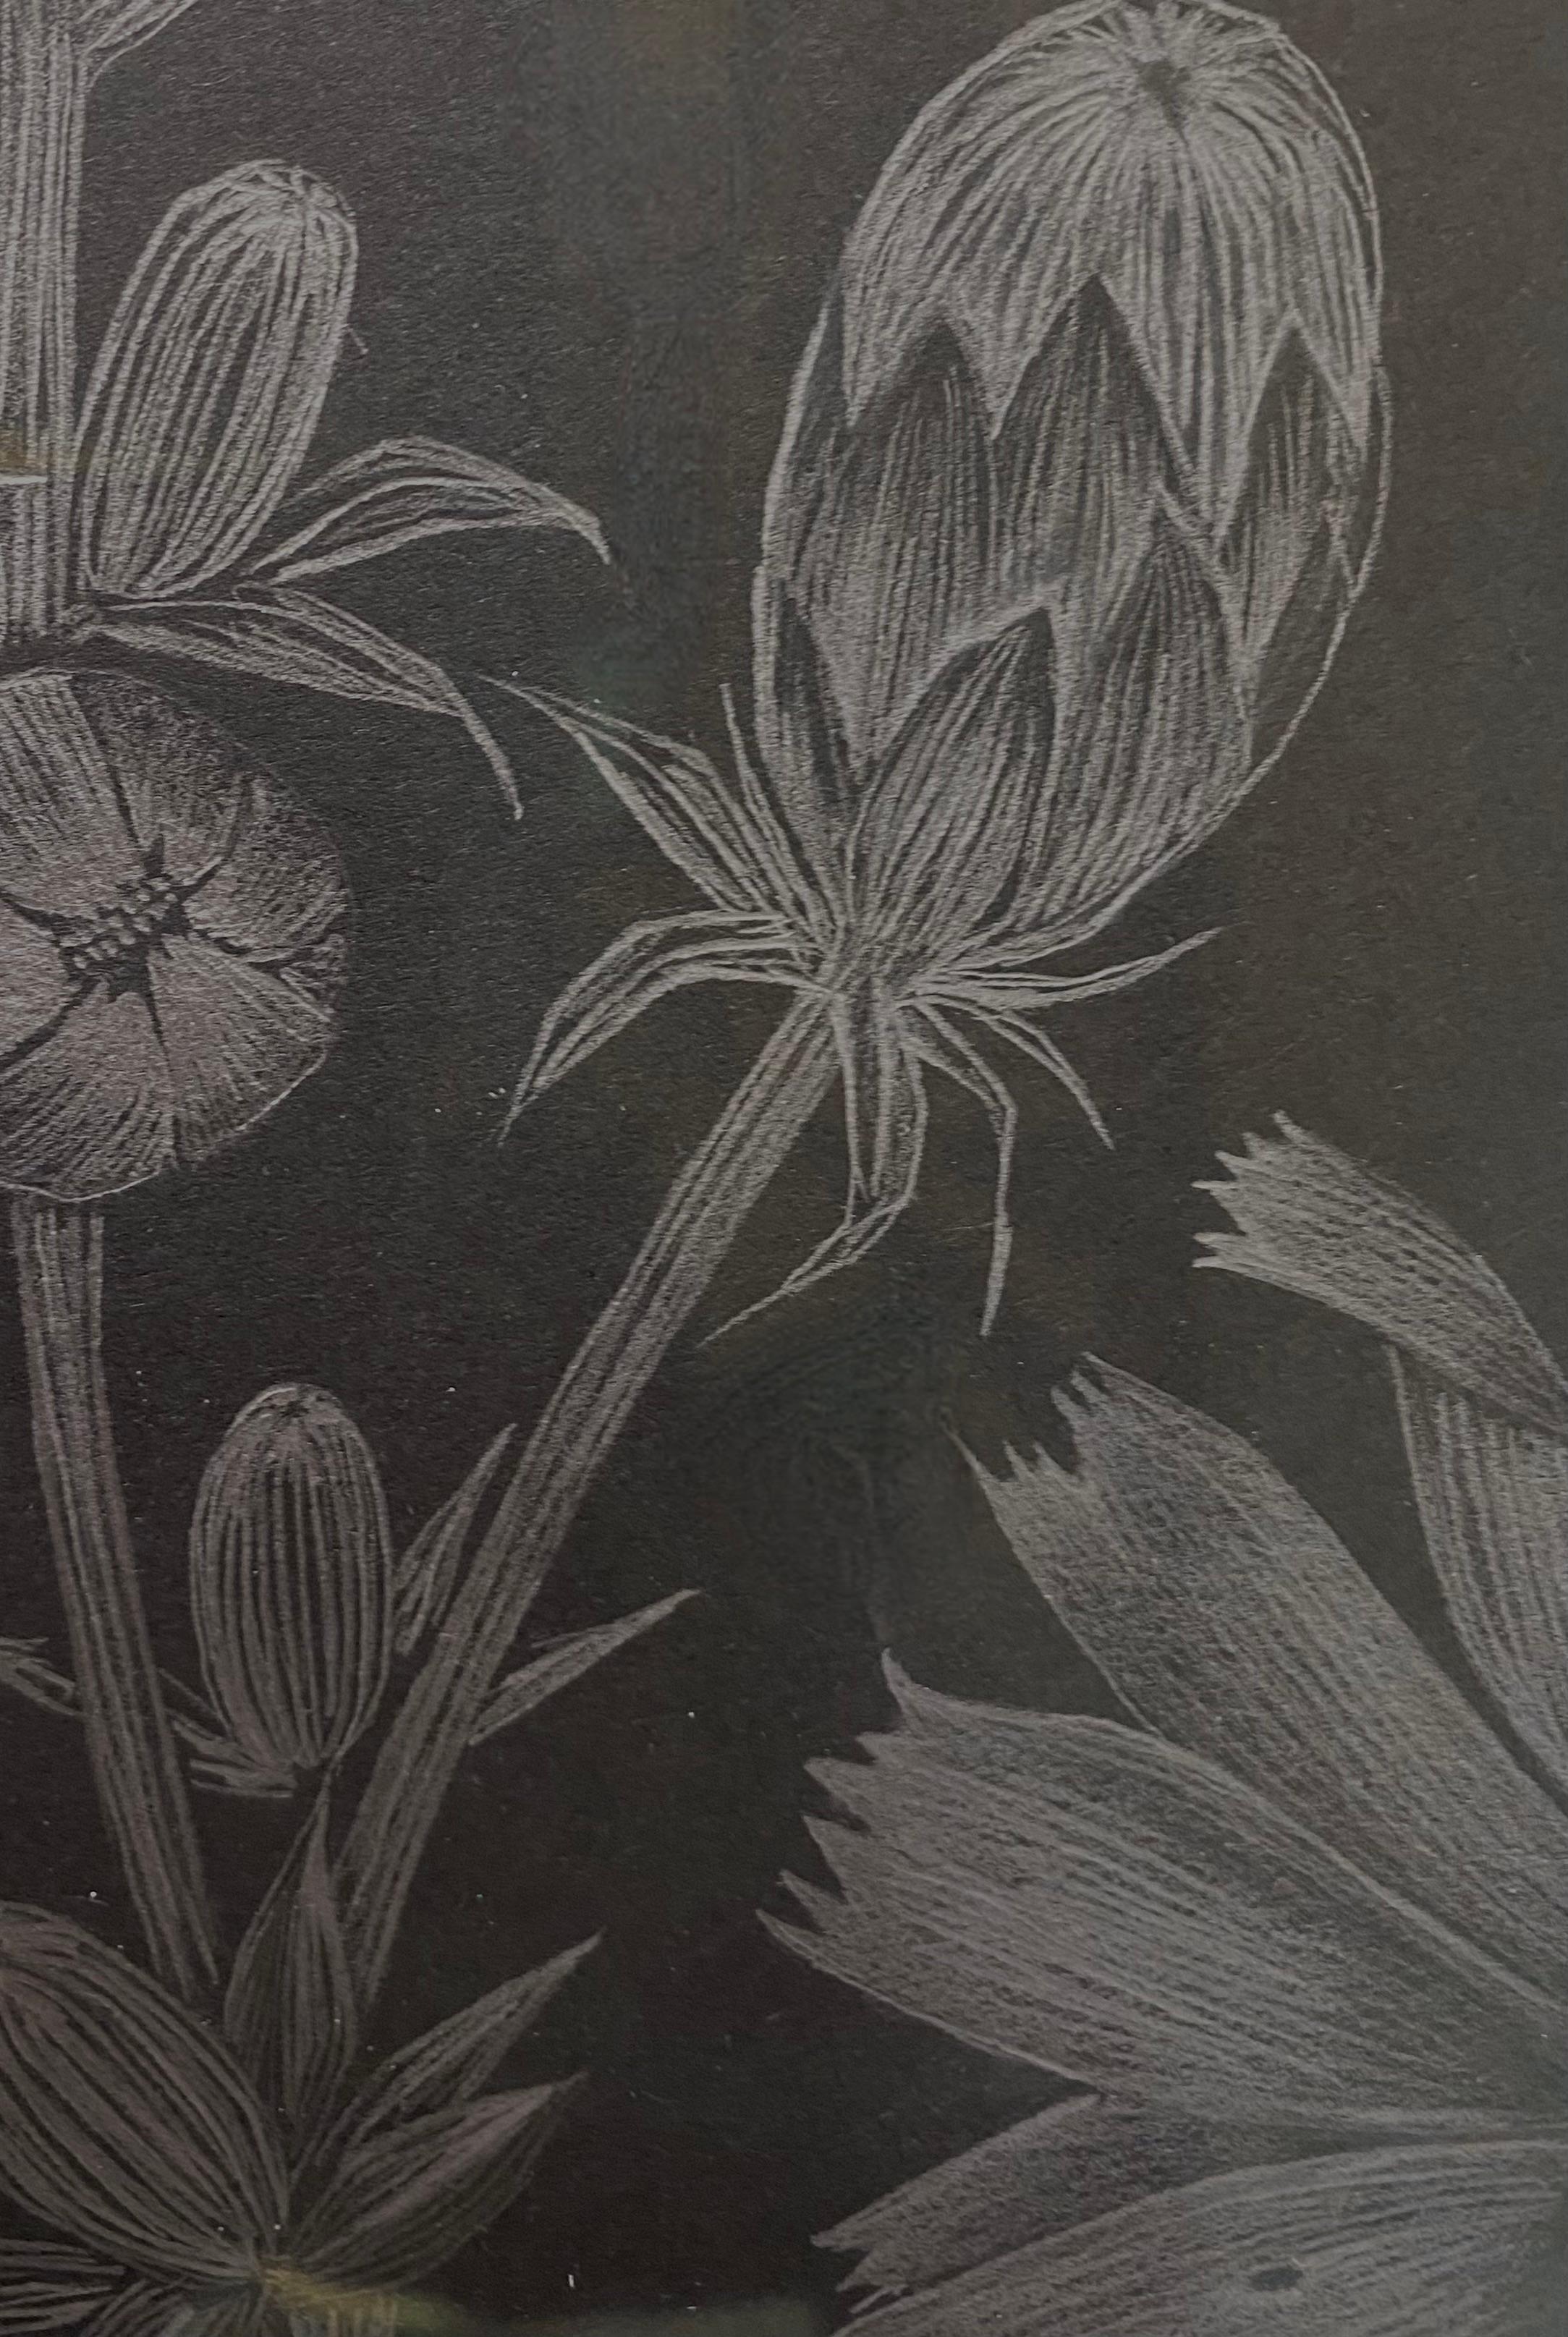 This delicate silver botanical drawing is made with graphite on painted black paper. The exploration of ephemerality through the perennial chicory plant, and the plant's texture and movement, are the focus of this series by Margot Glass. The